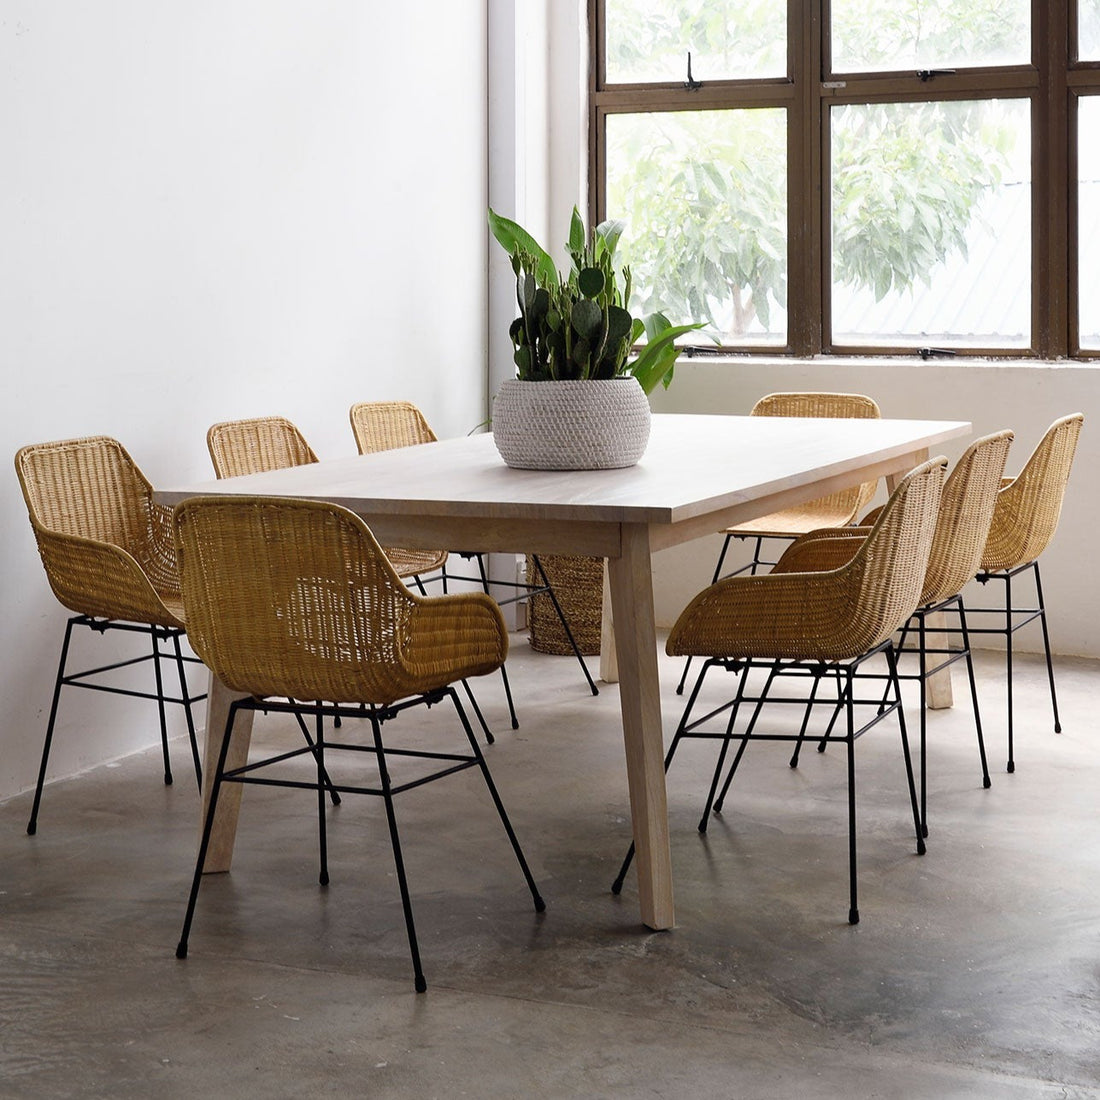 Gili Dining Table in white wash - Furniture